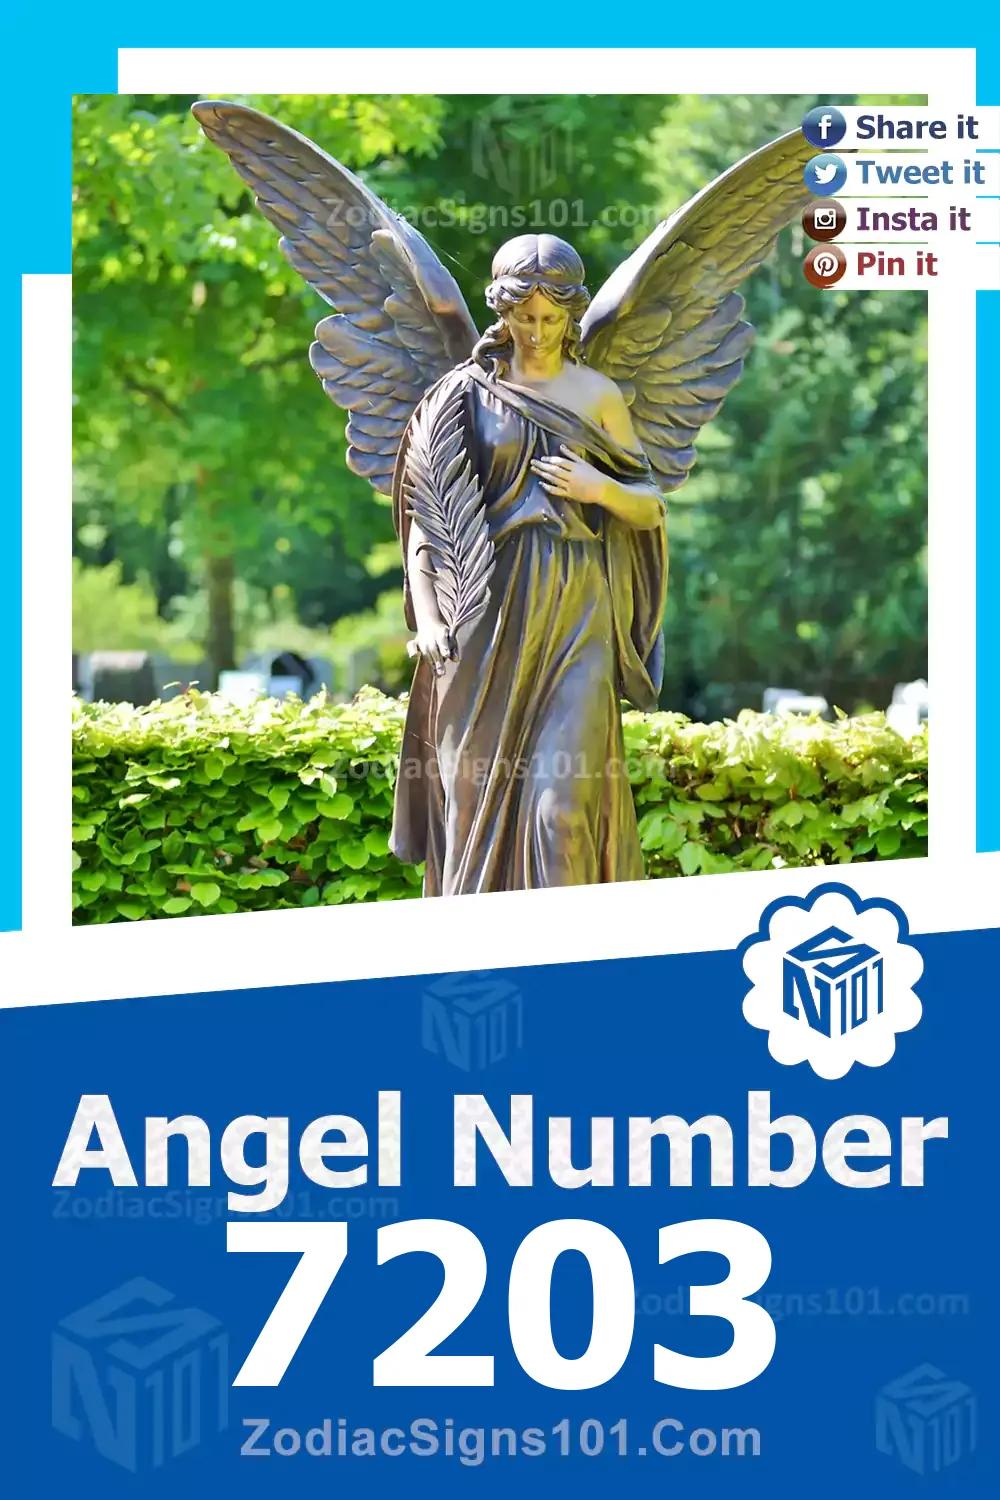 7203 Angel Number Meaning